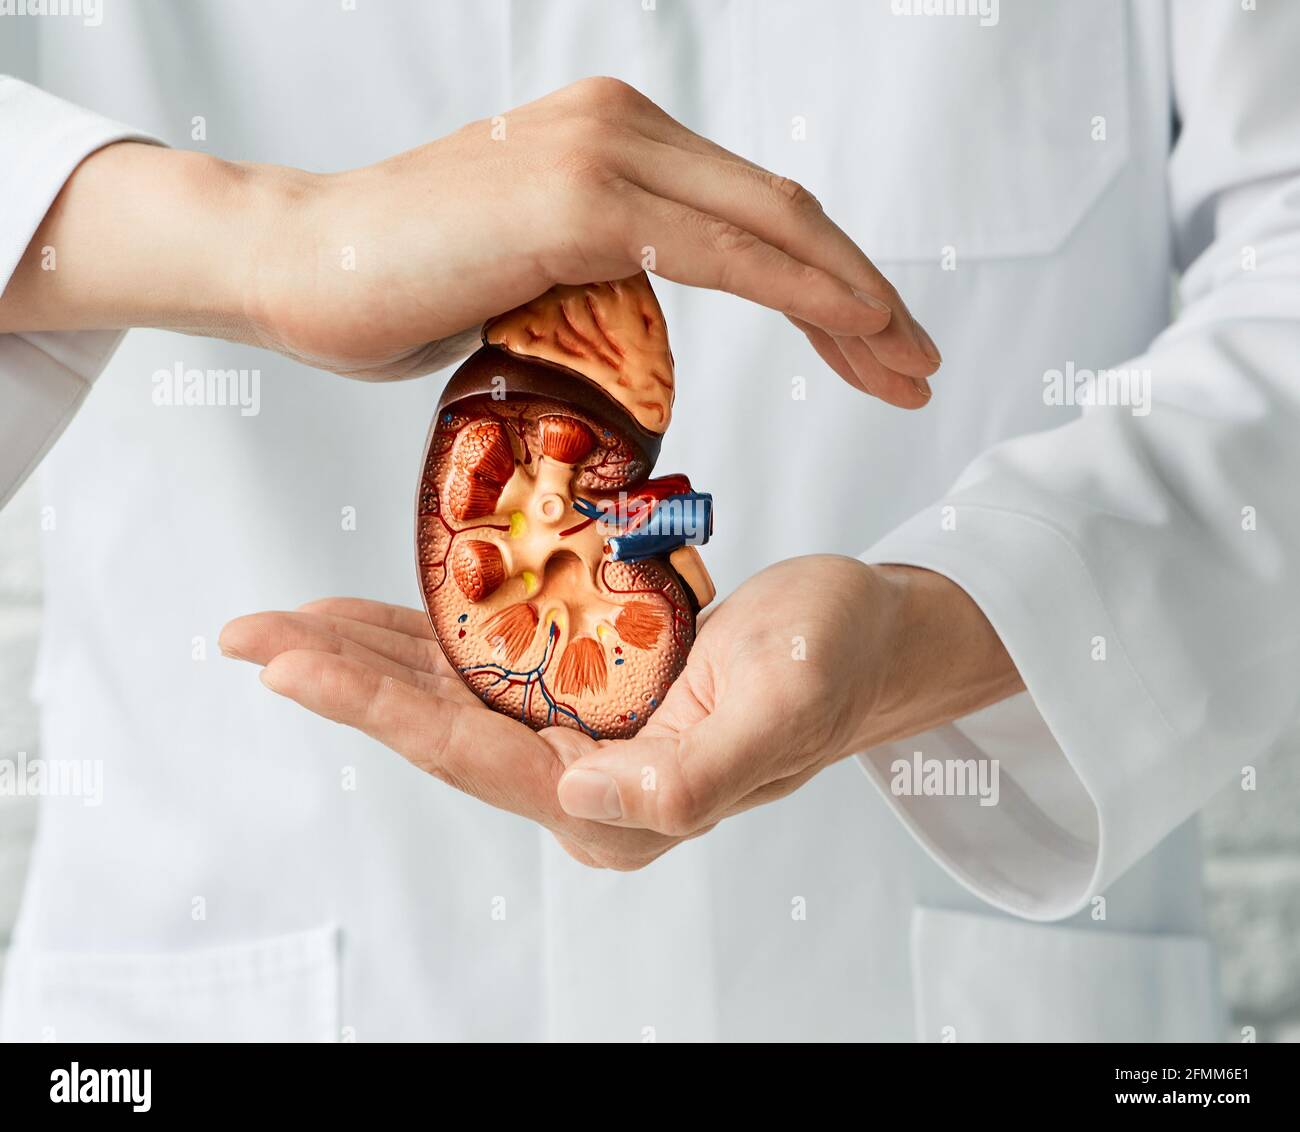 medical care of kidney disease. doctor holding anatomical model of kidneys in hands Stock Photo